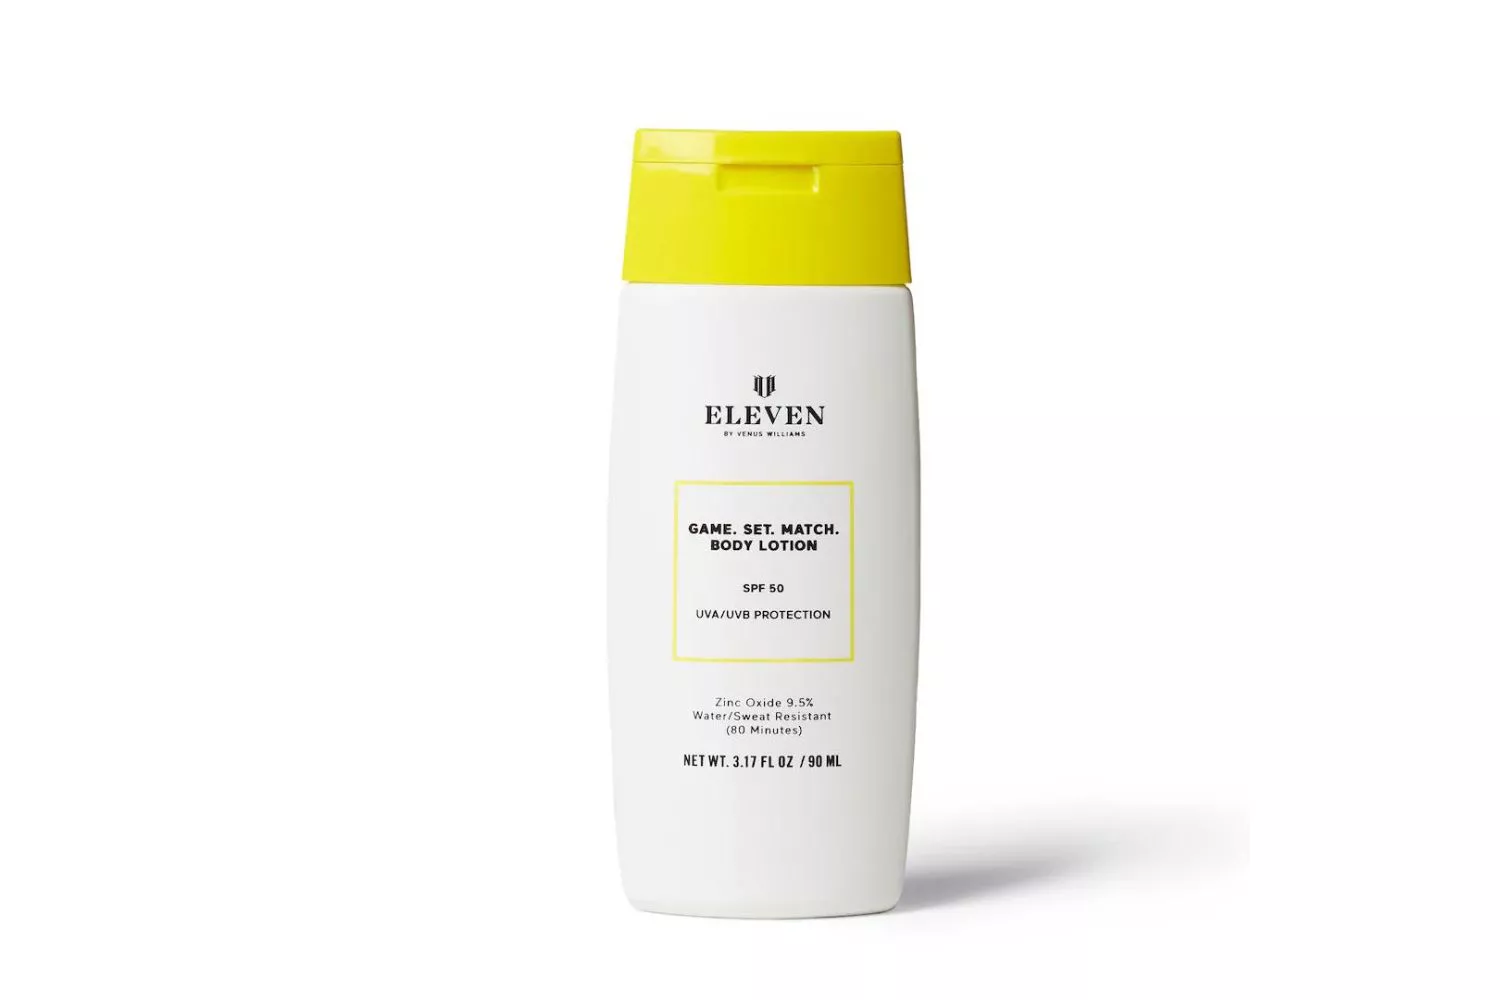 EleVen by Venus Williams Skin Game. Set. Match. Body Lotion SPF 50 